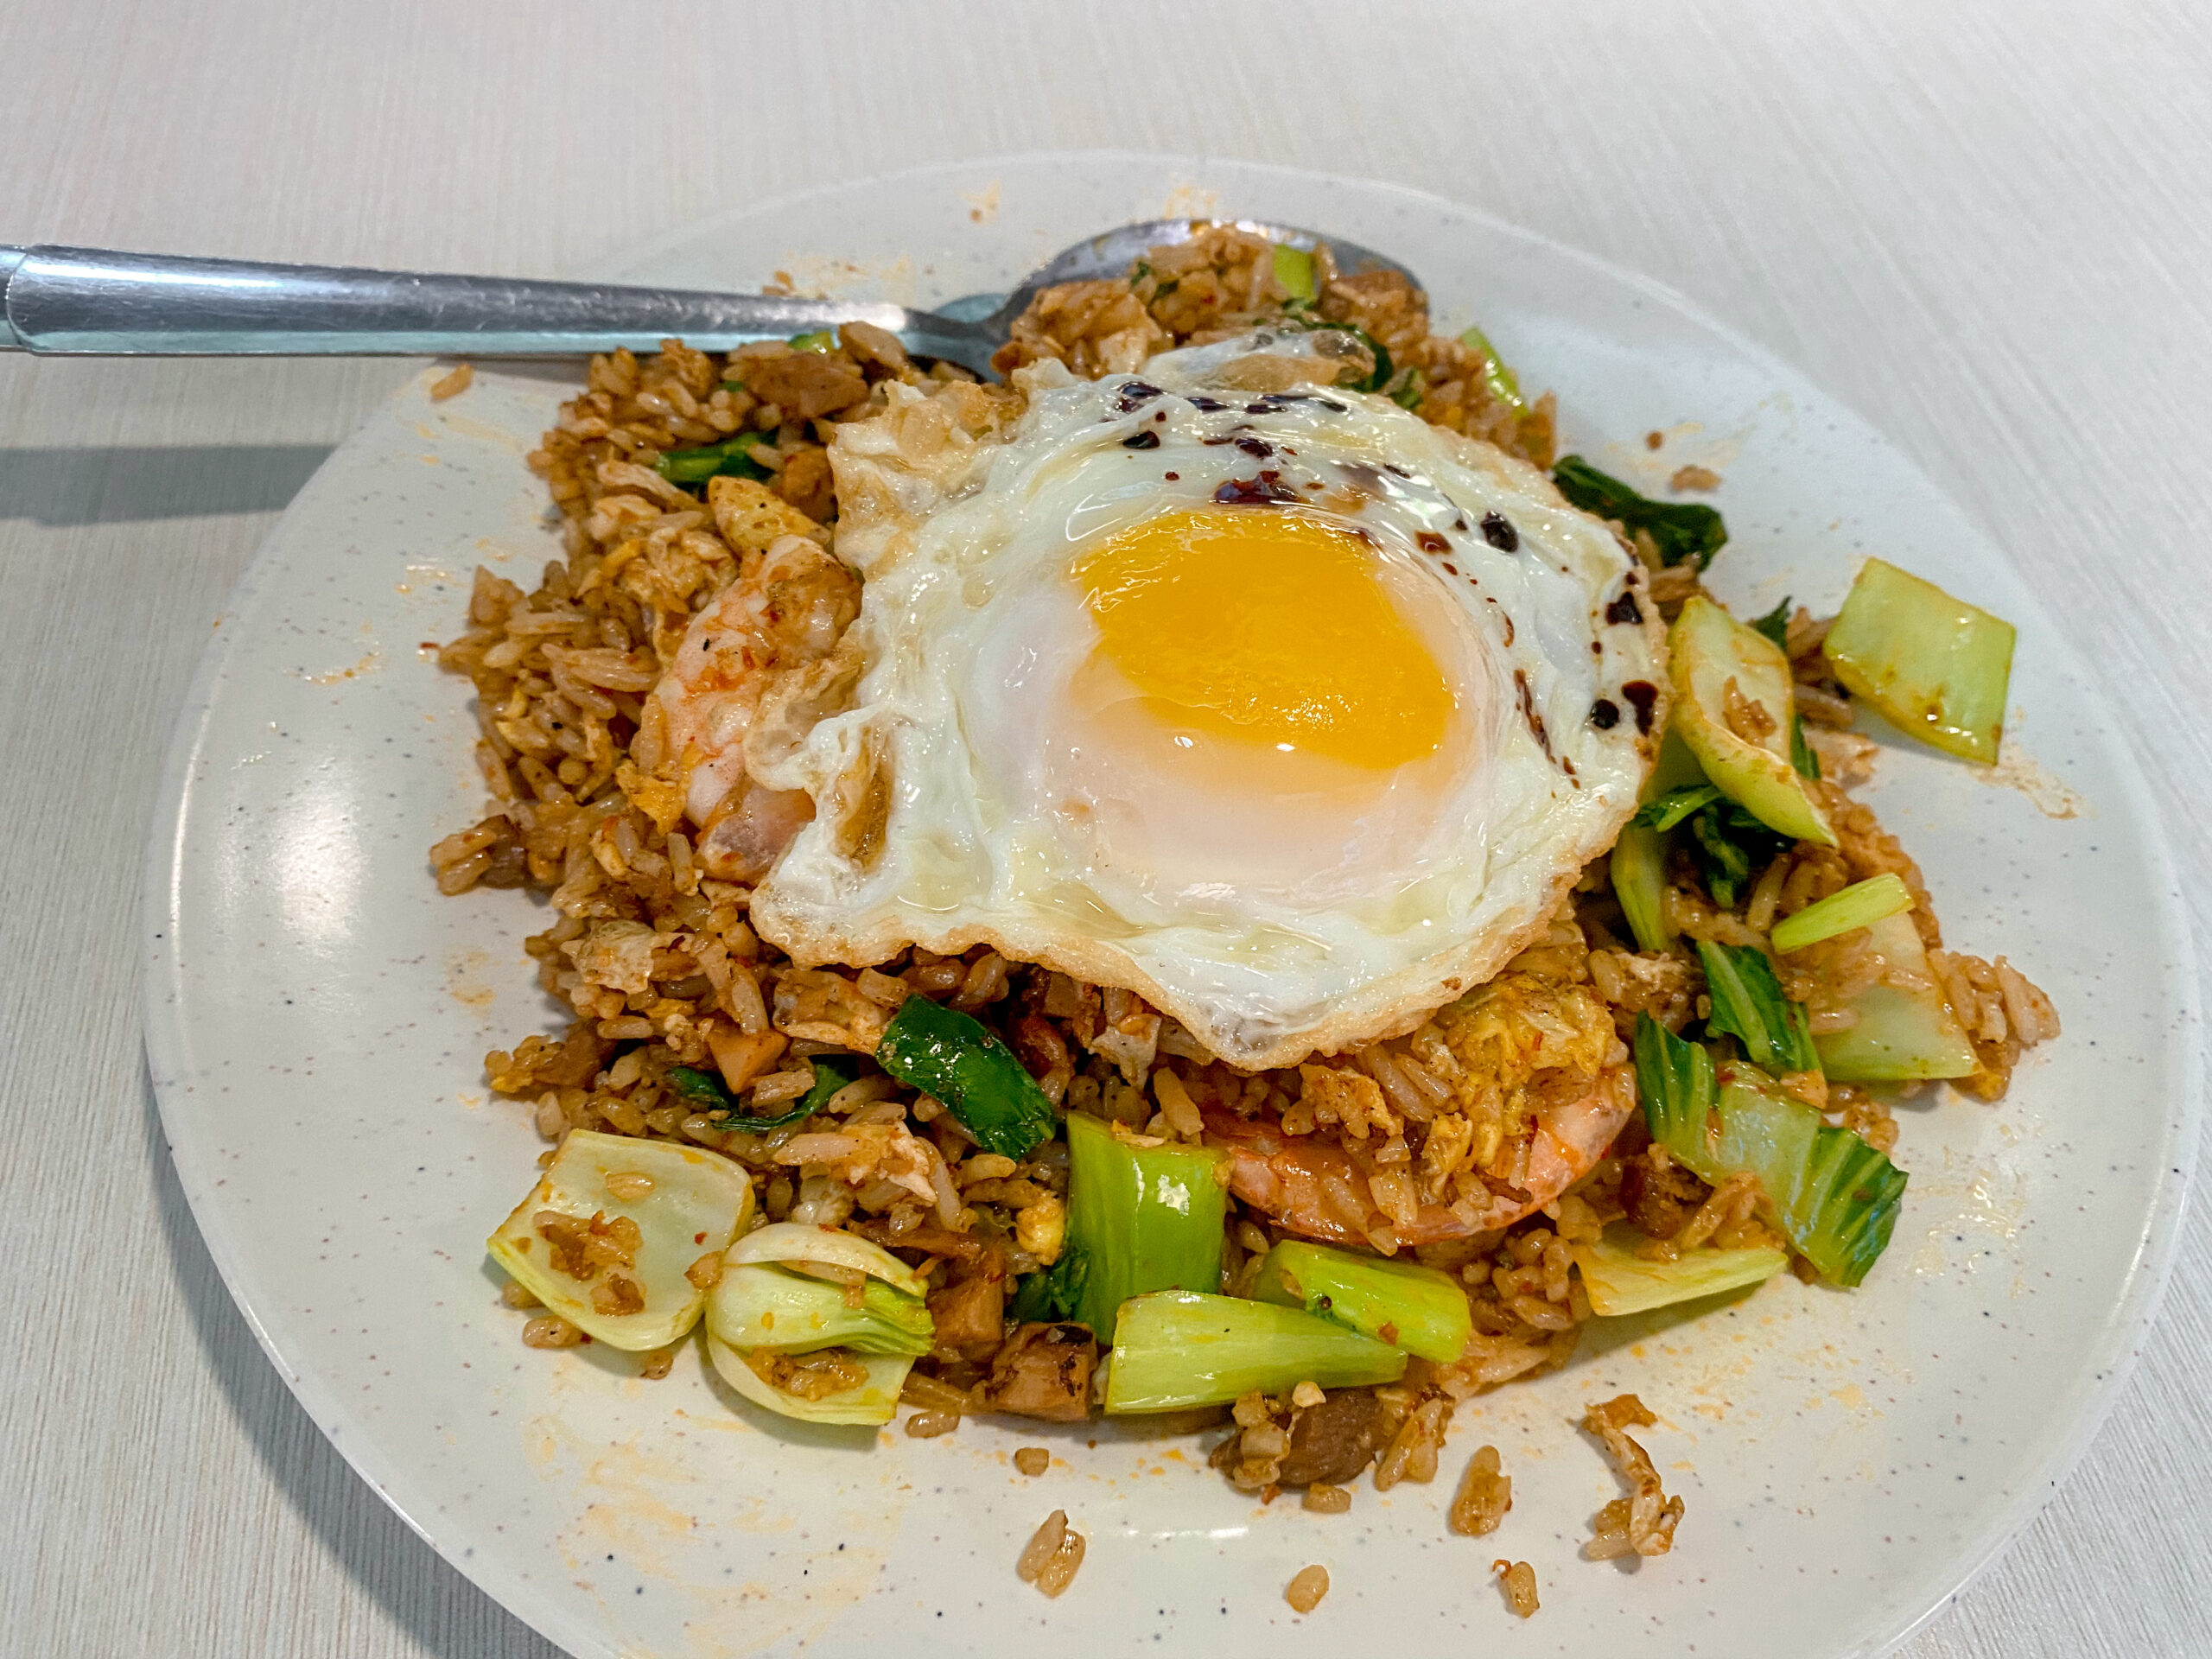 SS15's Uncle Soon nice or not one? We tried their Prawn and Char Siew Fried Rice